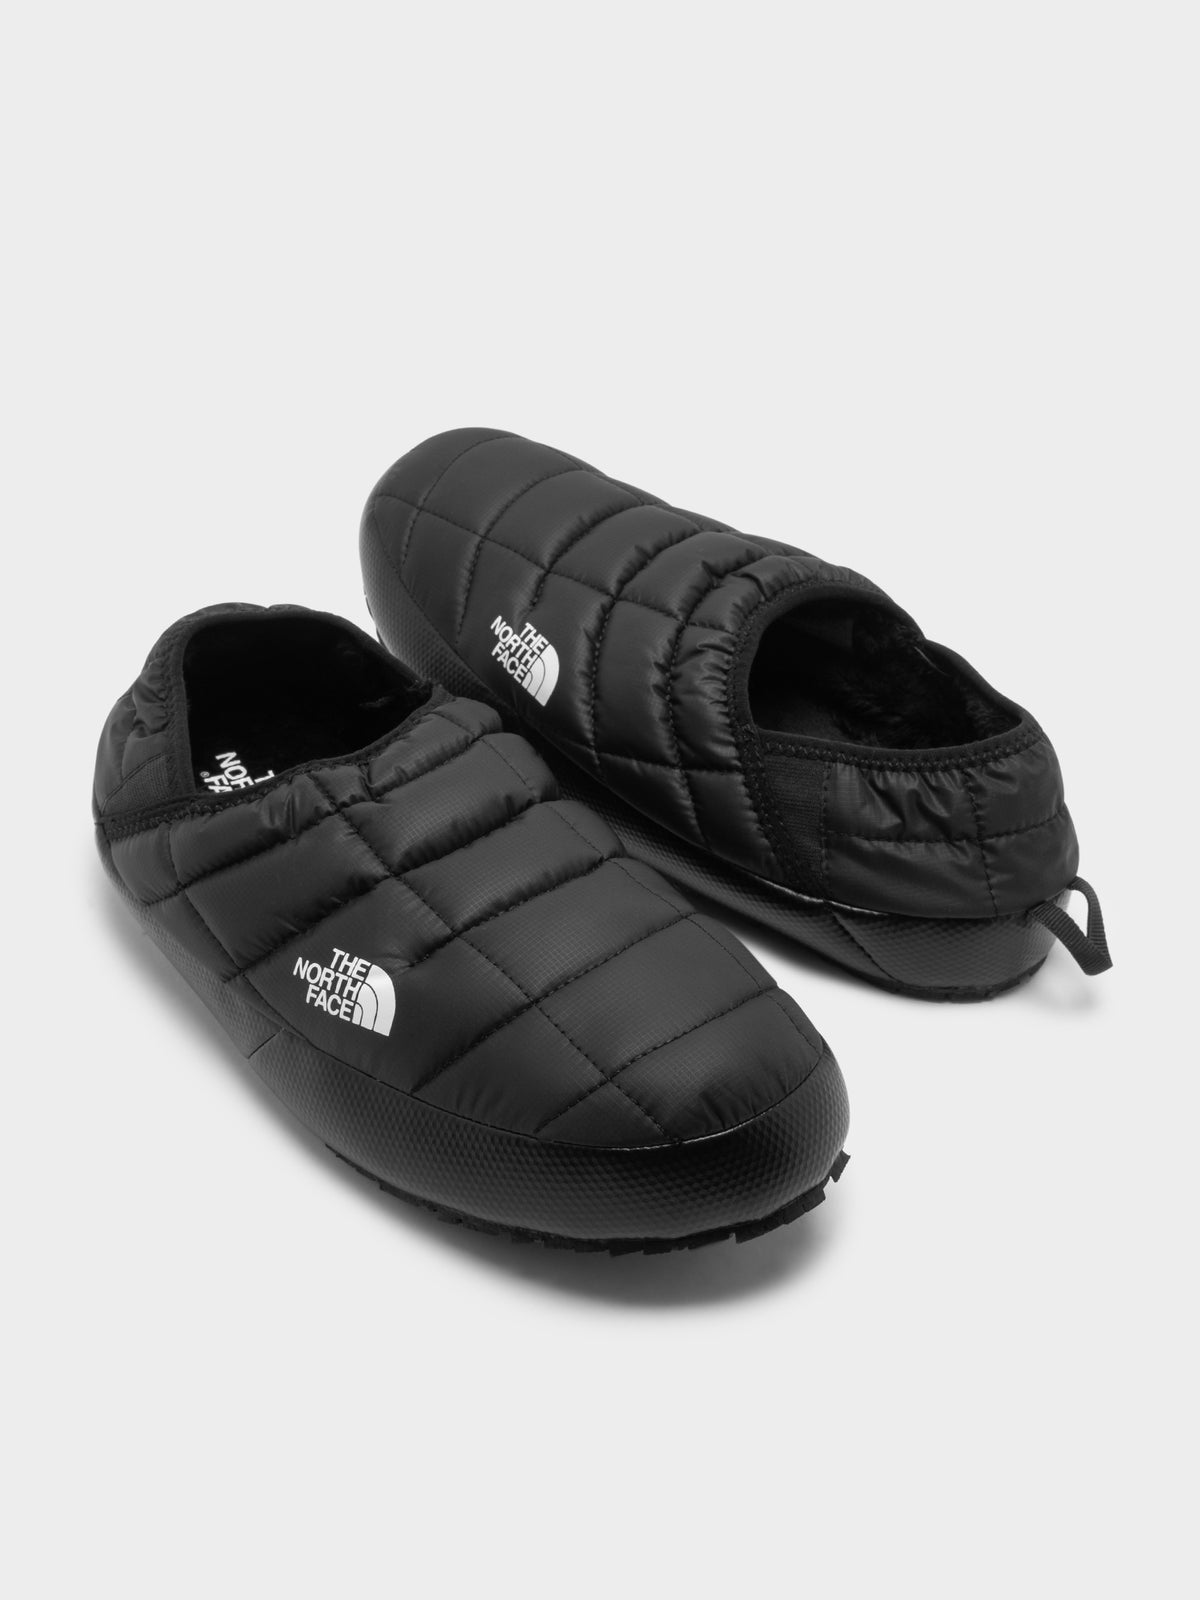 Mens Thermoball Traction Mule in TNF Black